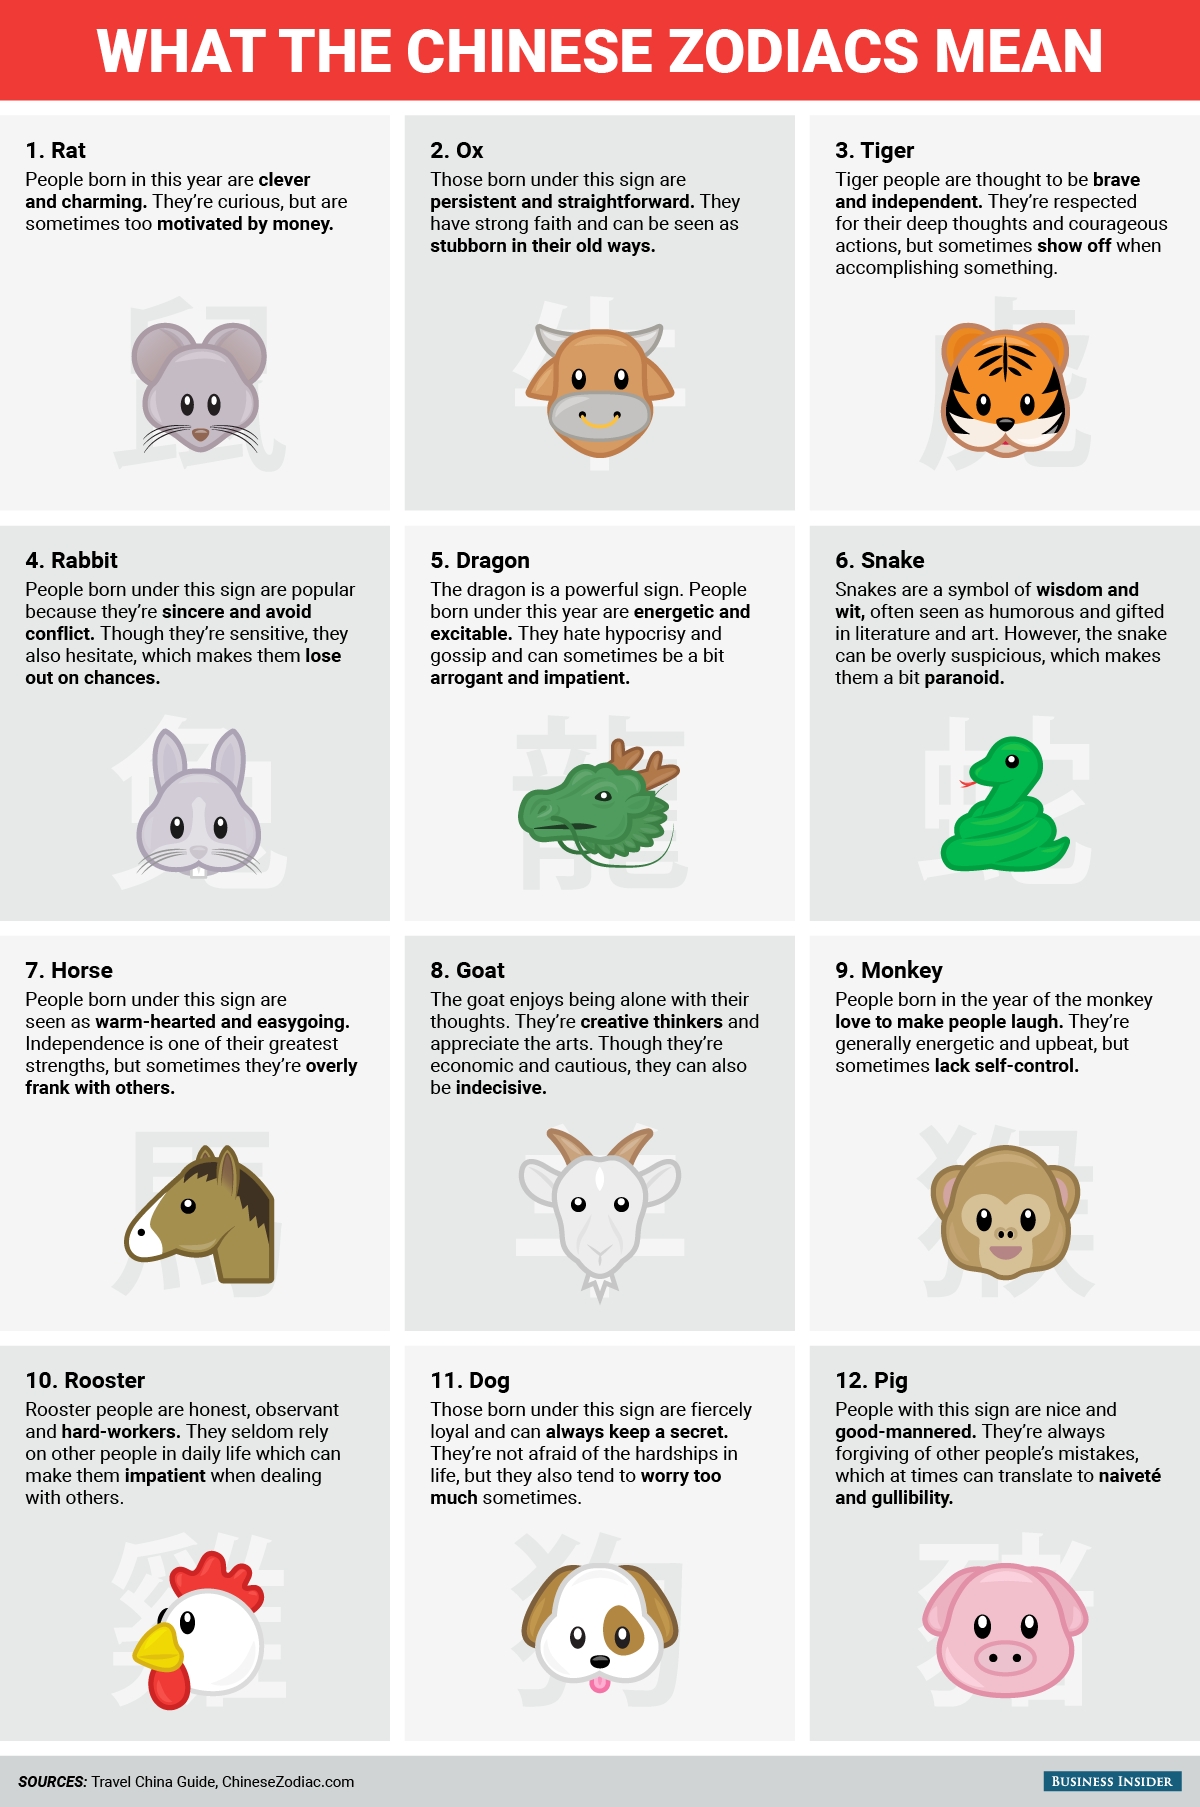 Happy Chinese New Year! This Is What The Chinese Zodiac Says Chinese Calendar Zodiac Meanings